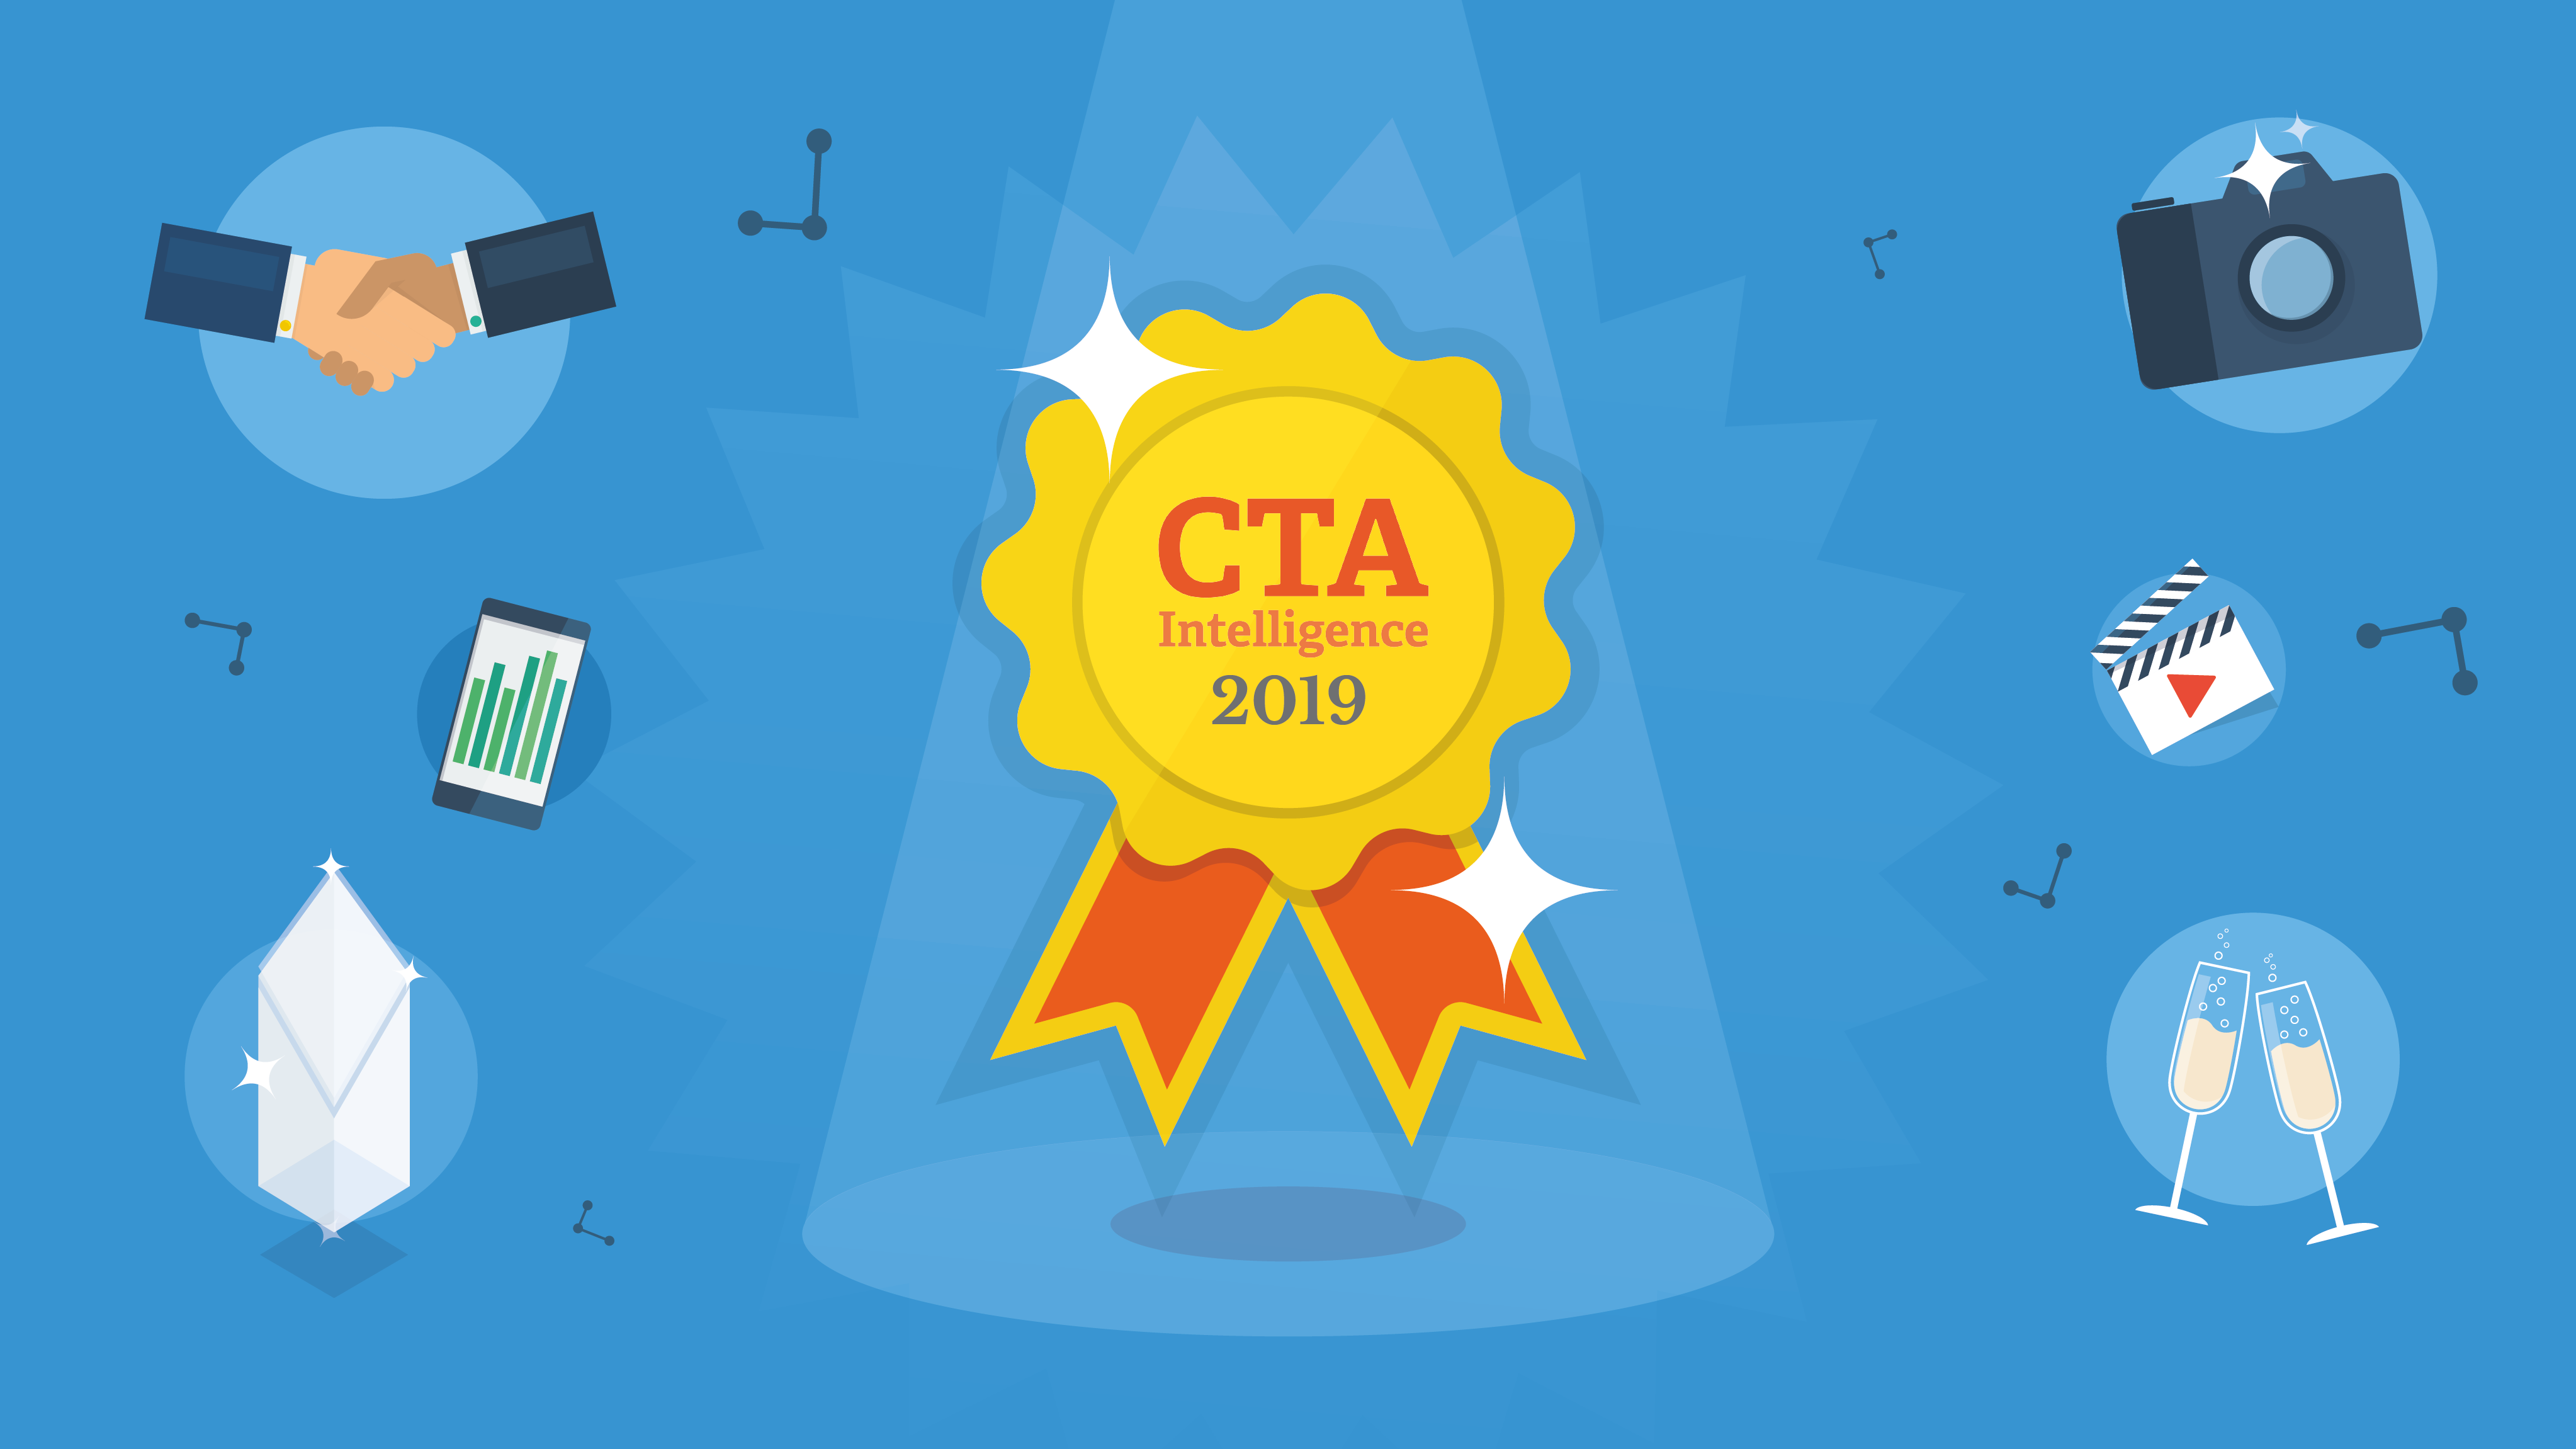 Cover image for post: Best Marketing and Communications Consultancy Agency at CTA Intelligence US Services Awards 2019